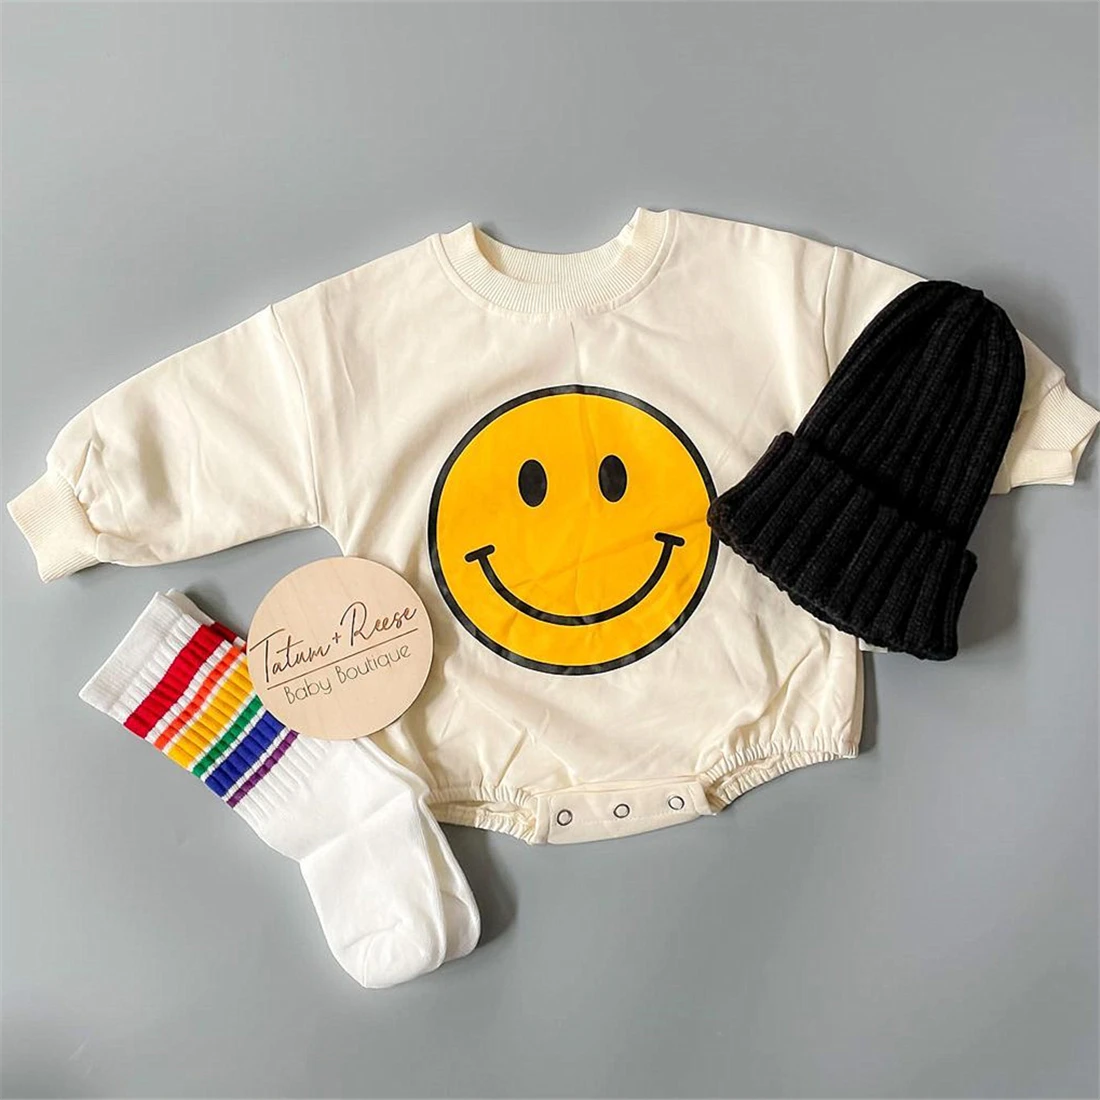 

2023 Cute Infant Baby Boy Girl Romper Cartoon Smile Print Round Neck Long Sleeve Playsuit Autumn Cotton Infant Girl Clothing